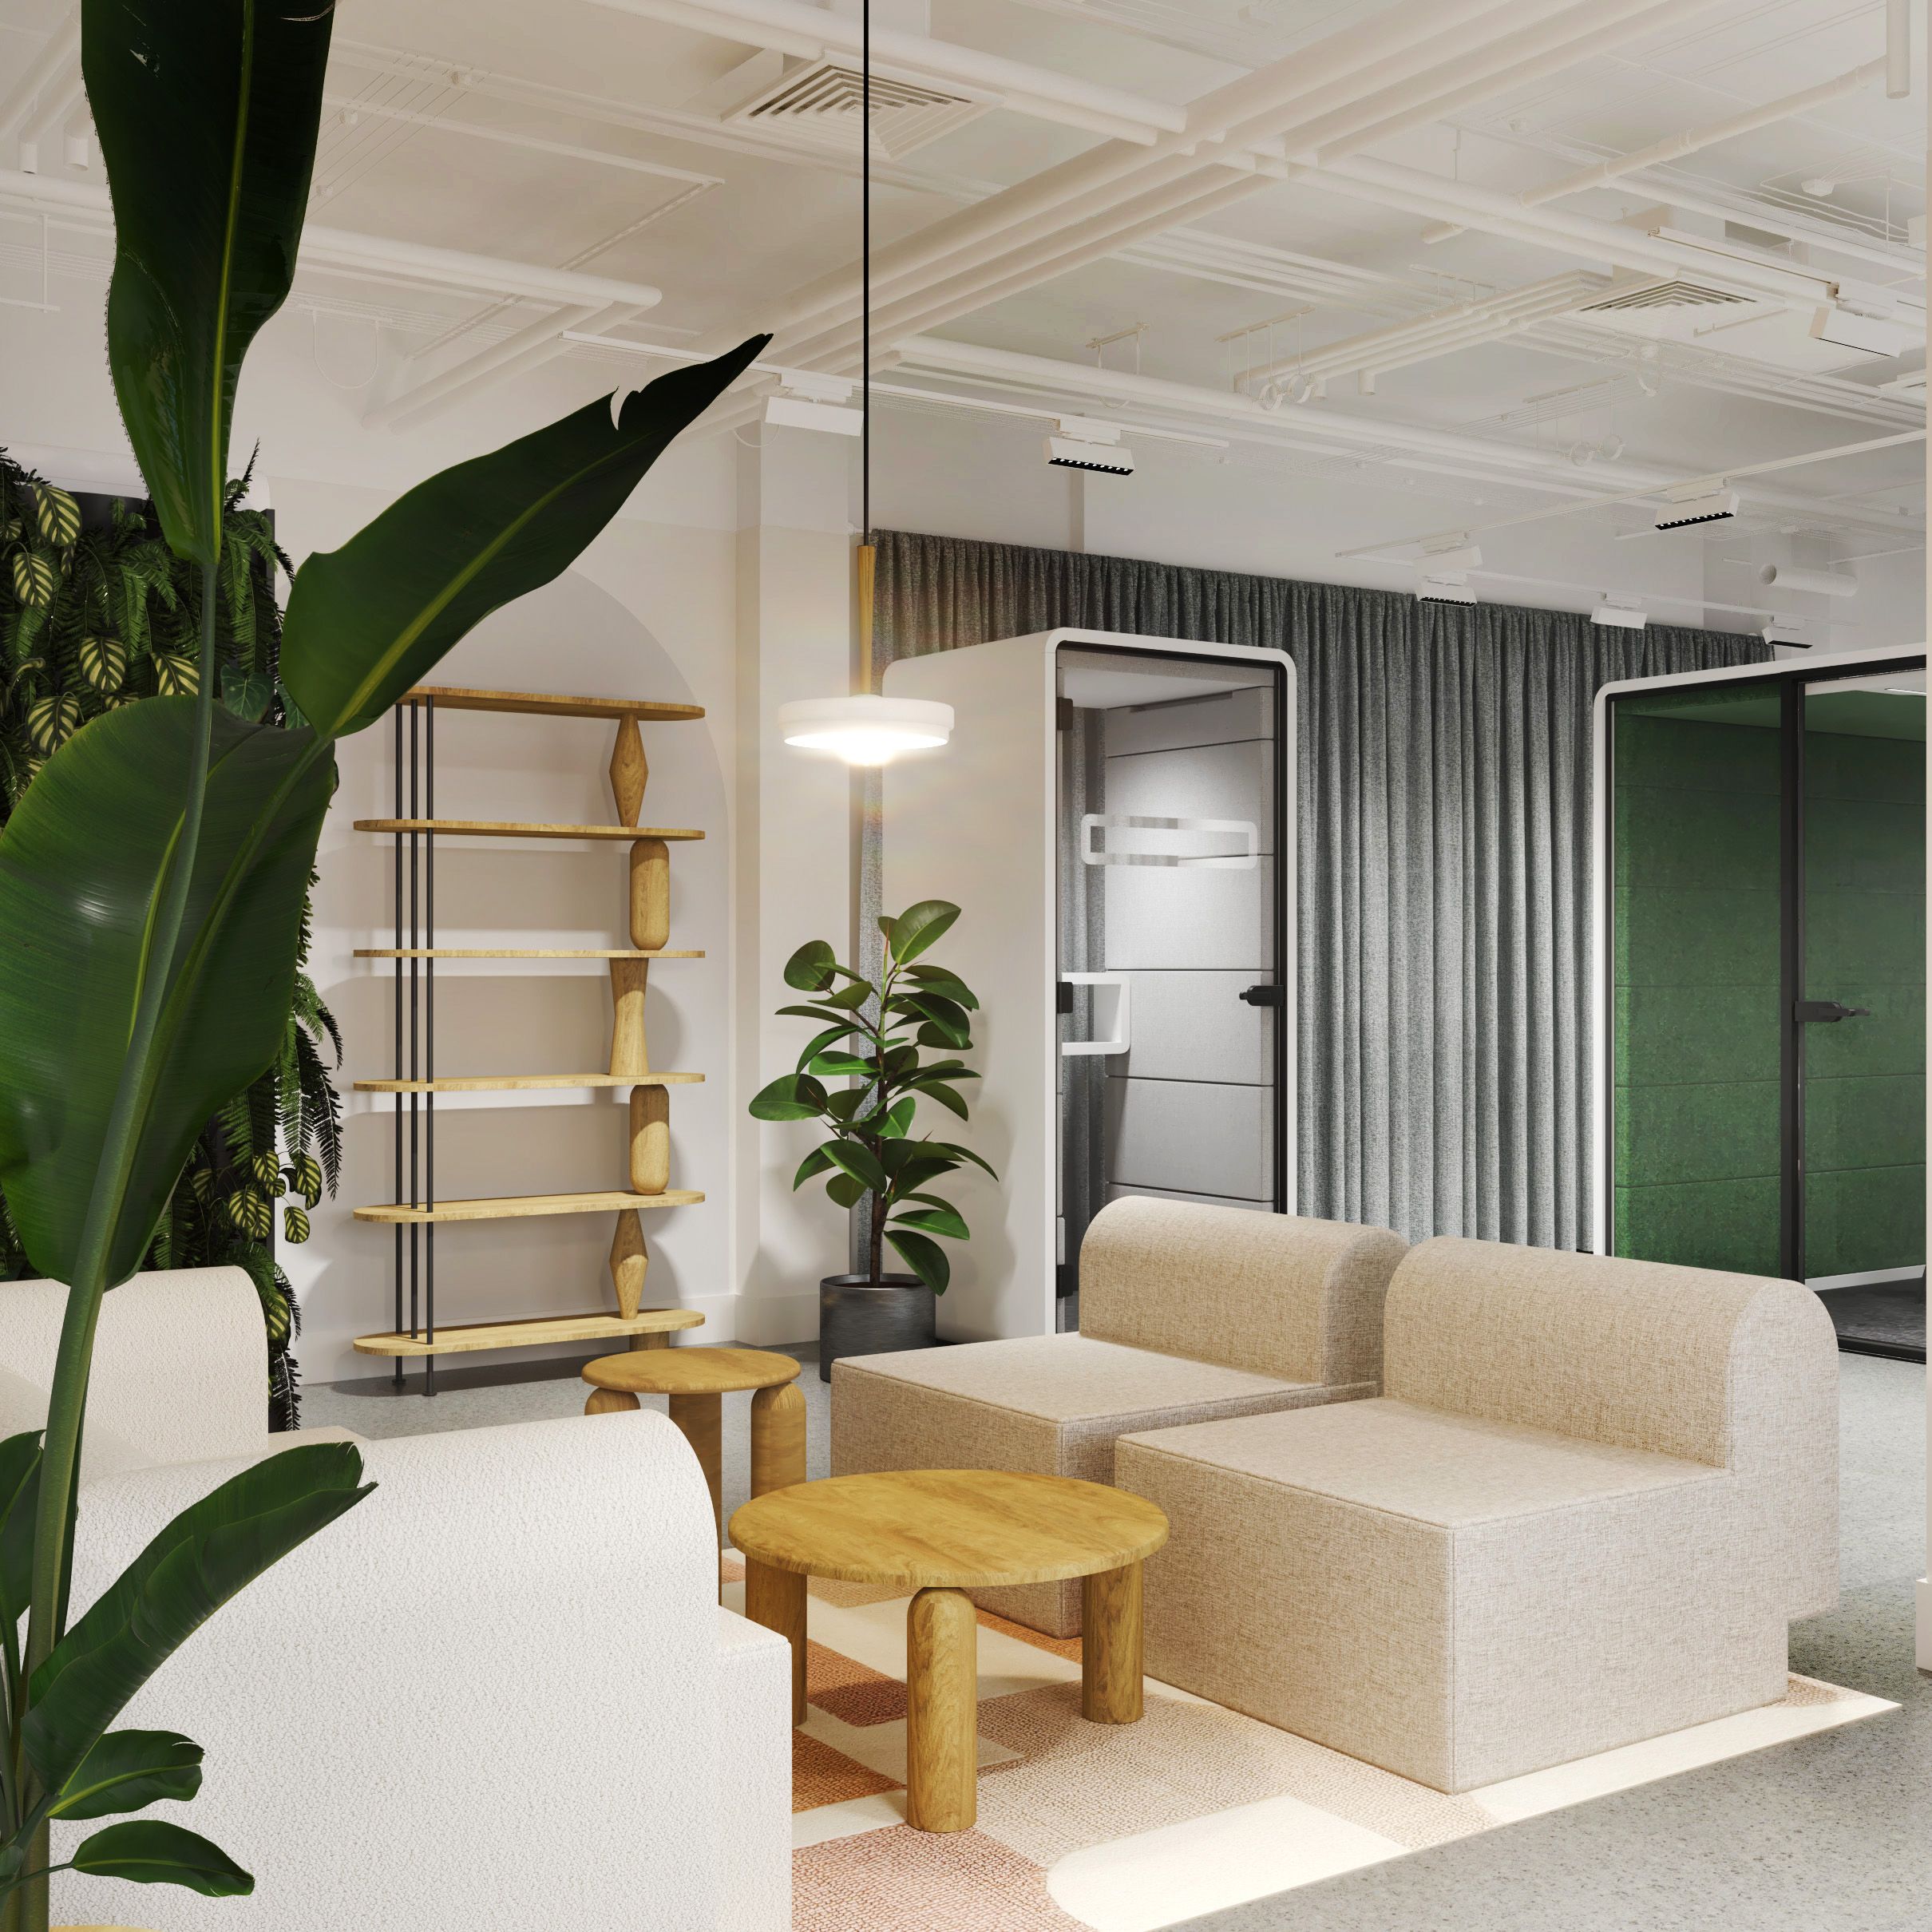 Making offices futureproof with Hushoffice pods and flexible furniture